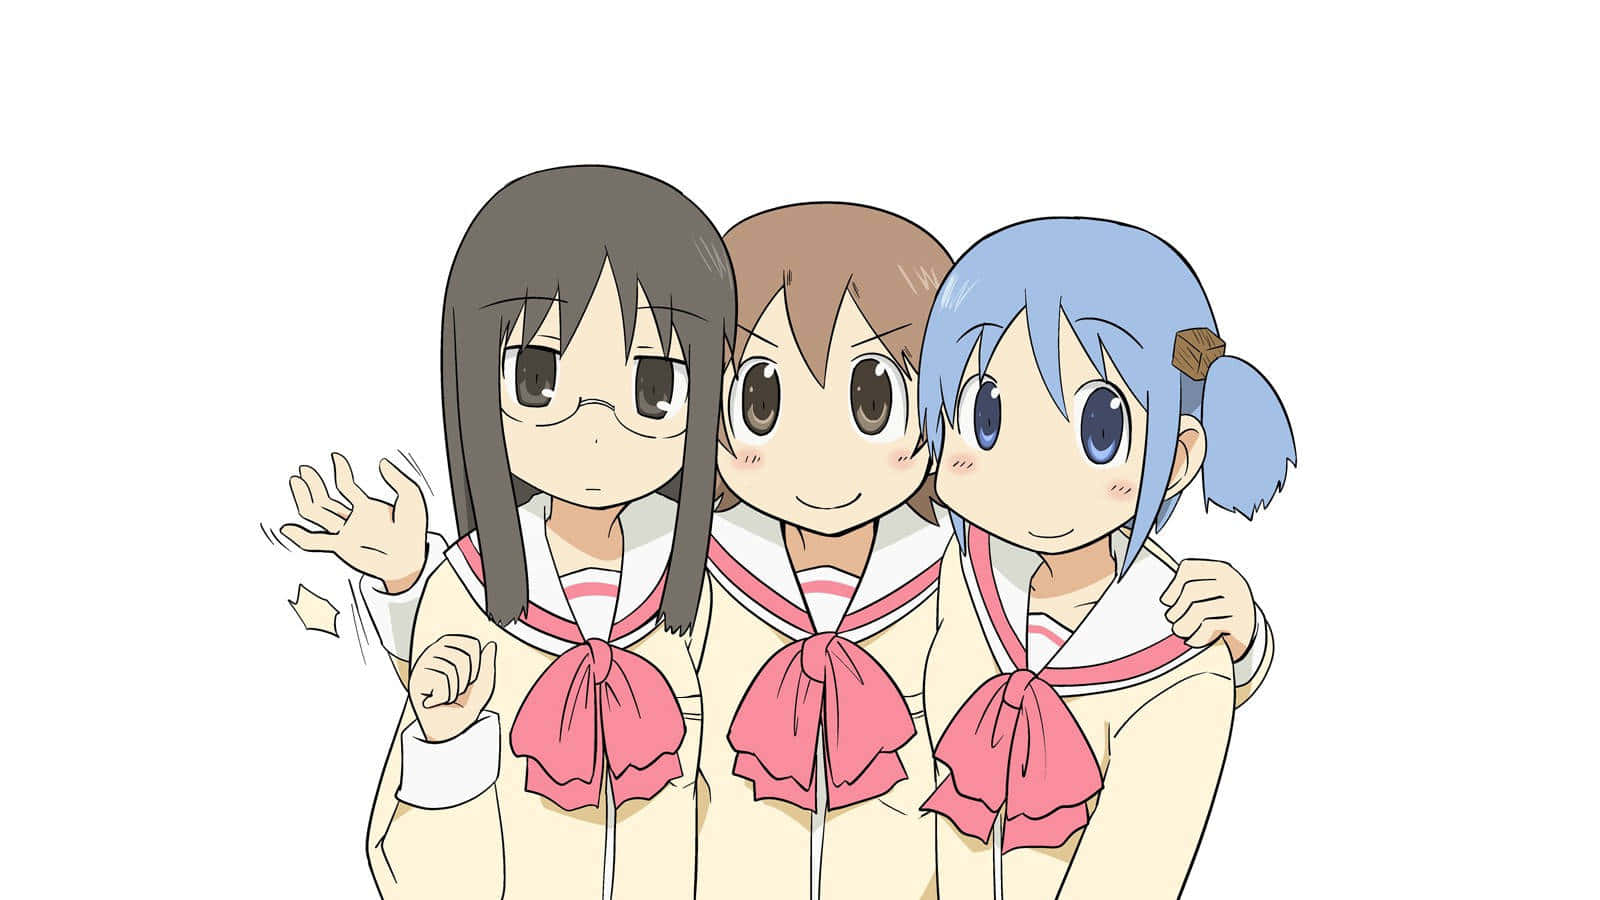 Three Anime Girls Standing Together With Their Hands Up Wallpaper